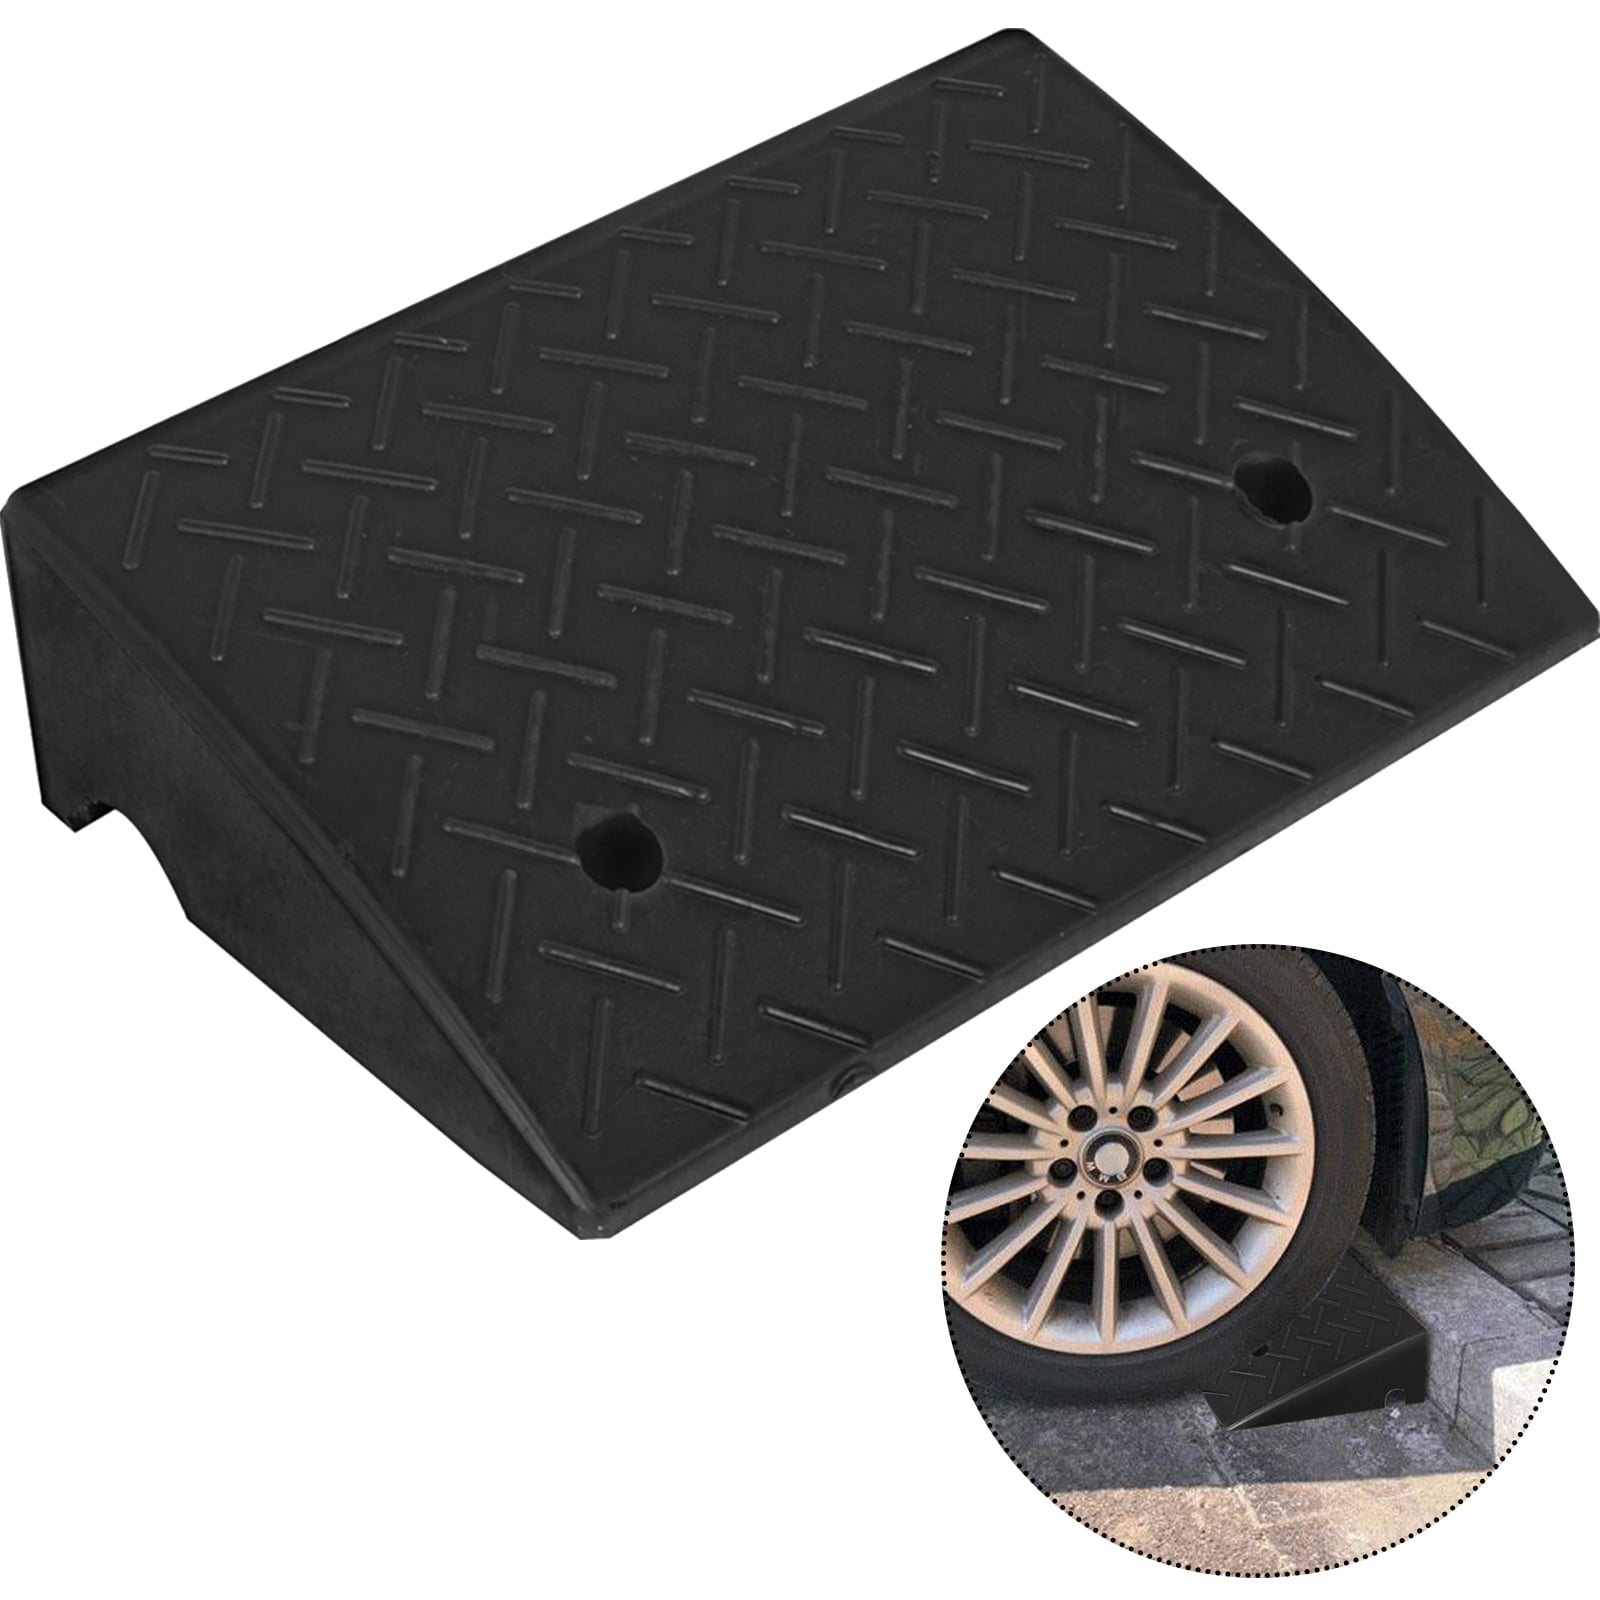 Parking Lot Entrance Curb Ramps Sturdy Durable Truck Ramps Home Use Step Mat Kerb Ramps Color : Black, Size : 100256CM 11 way bike CSQ-Ramps 4-11CM Multiple Heights Vehicle Ramps 